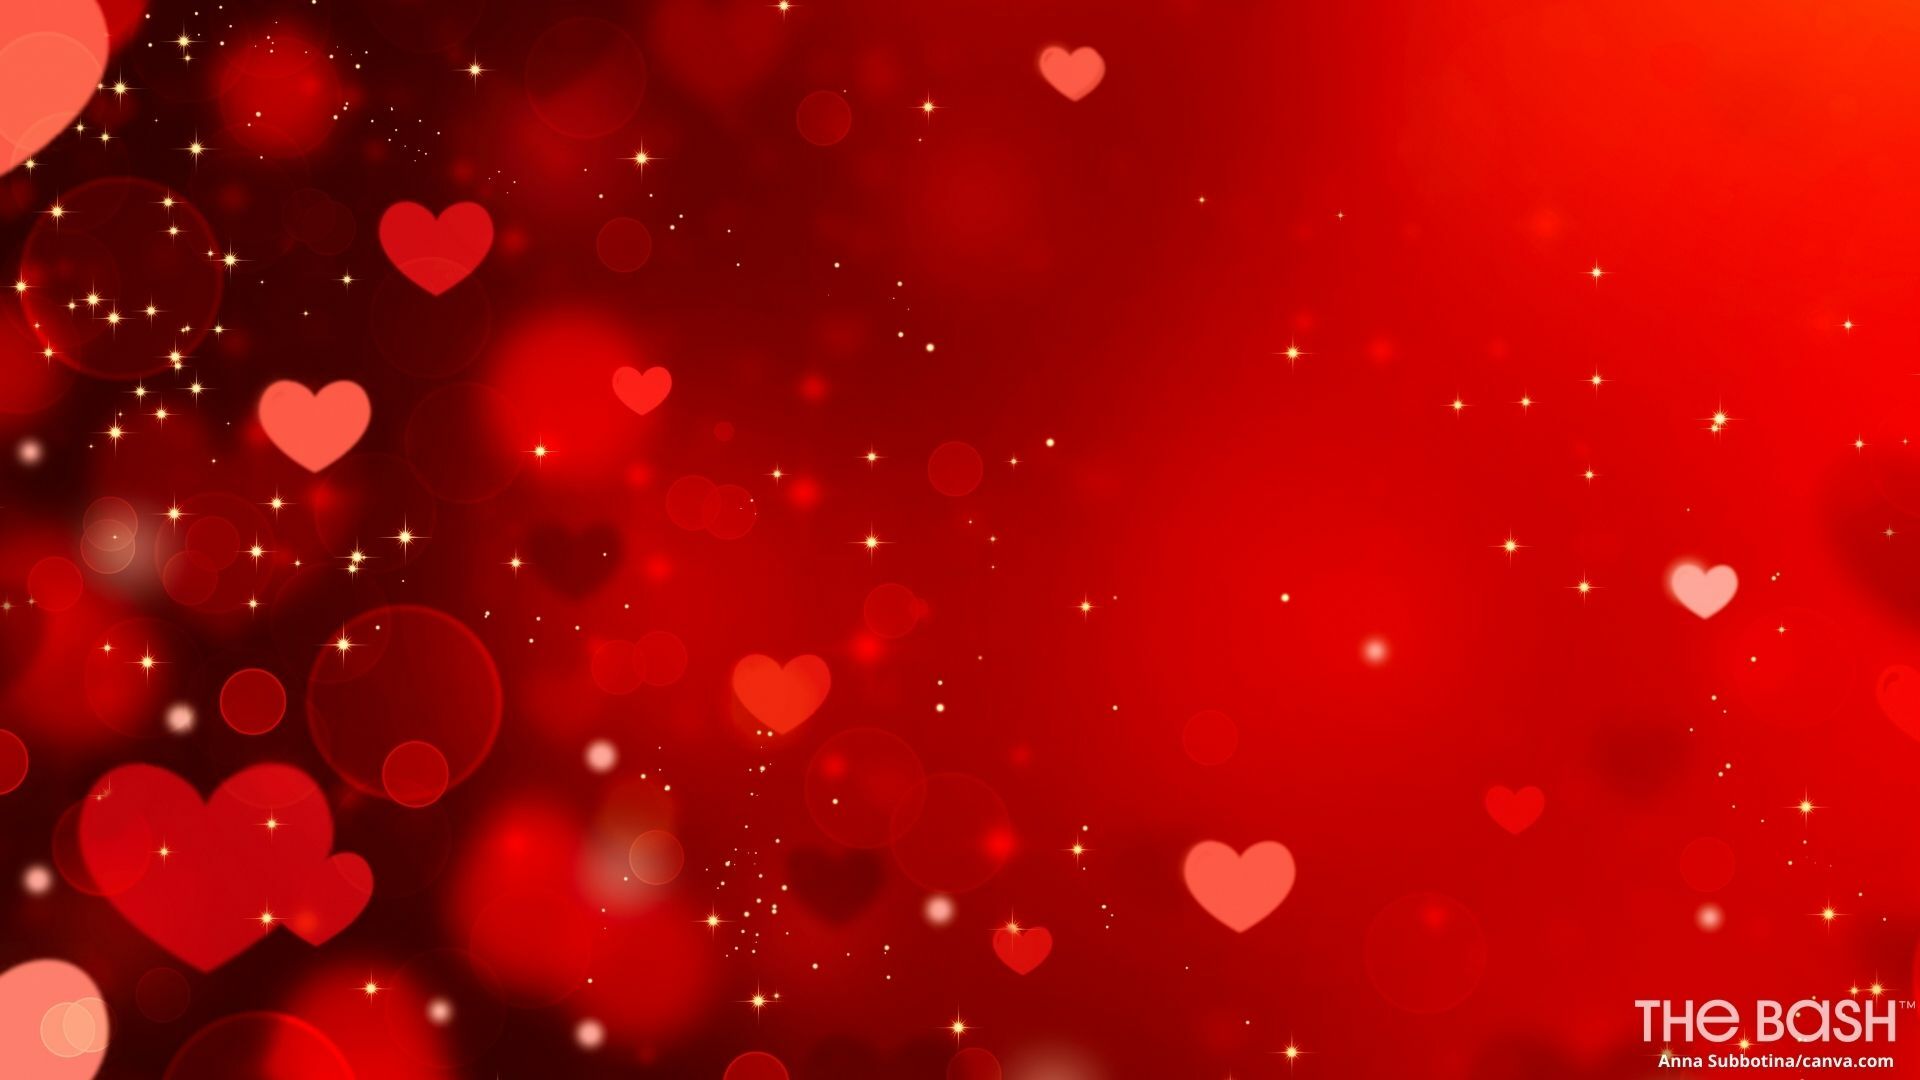 Red hearts on a background with sparkles - Valentine's Day